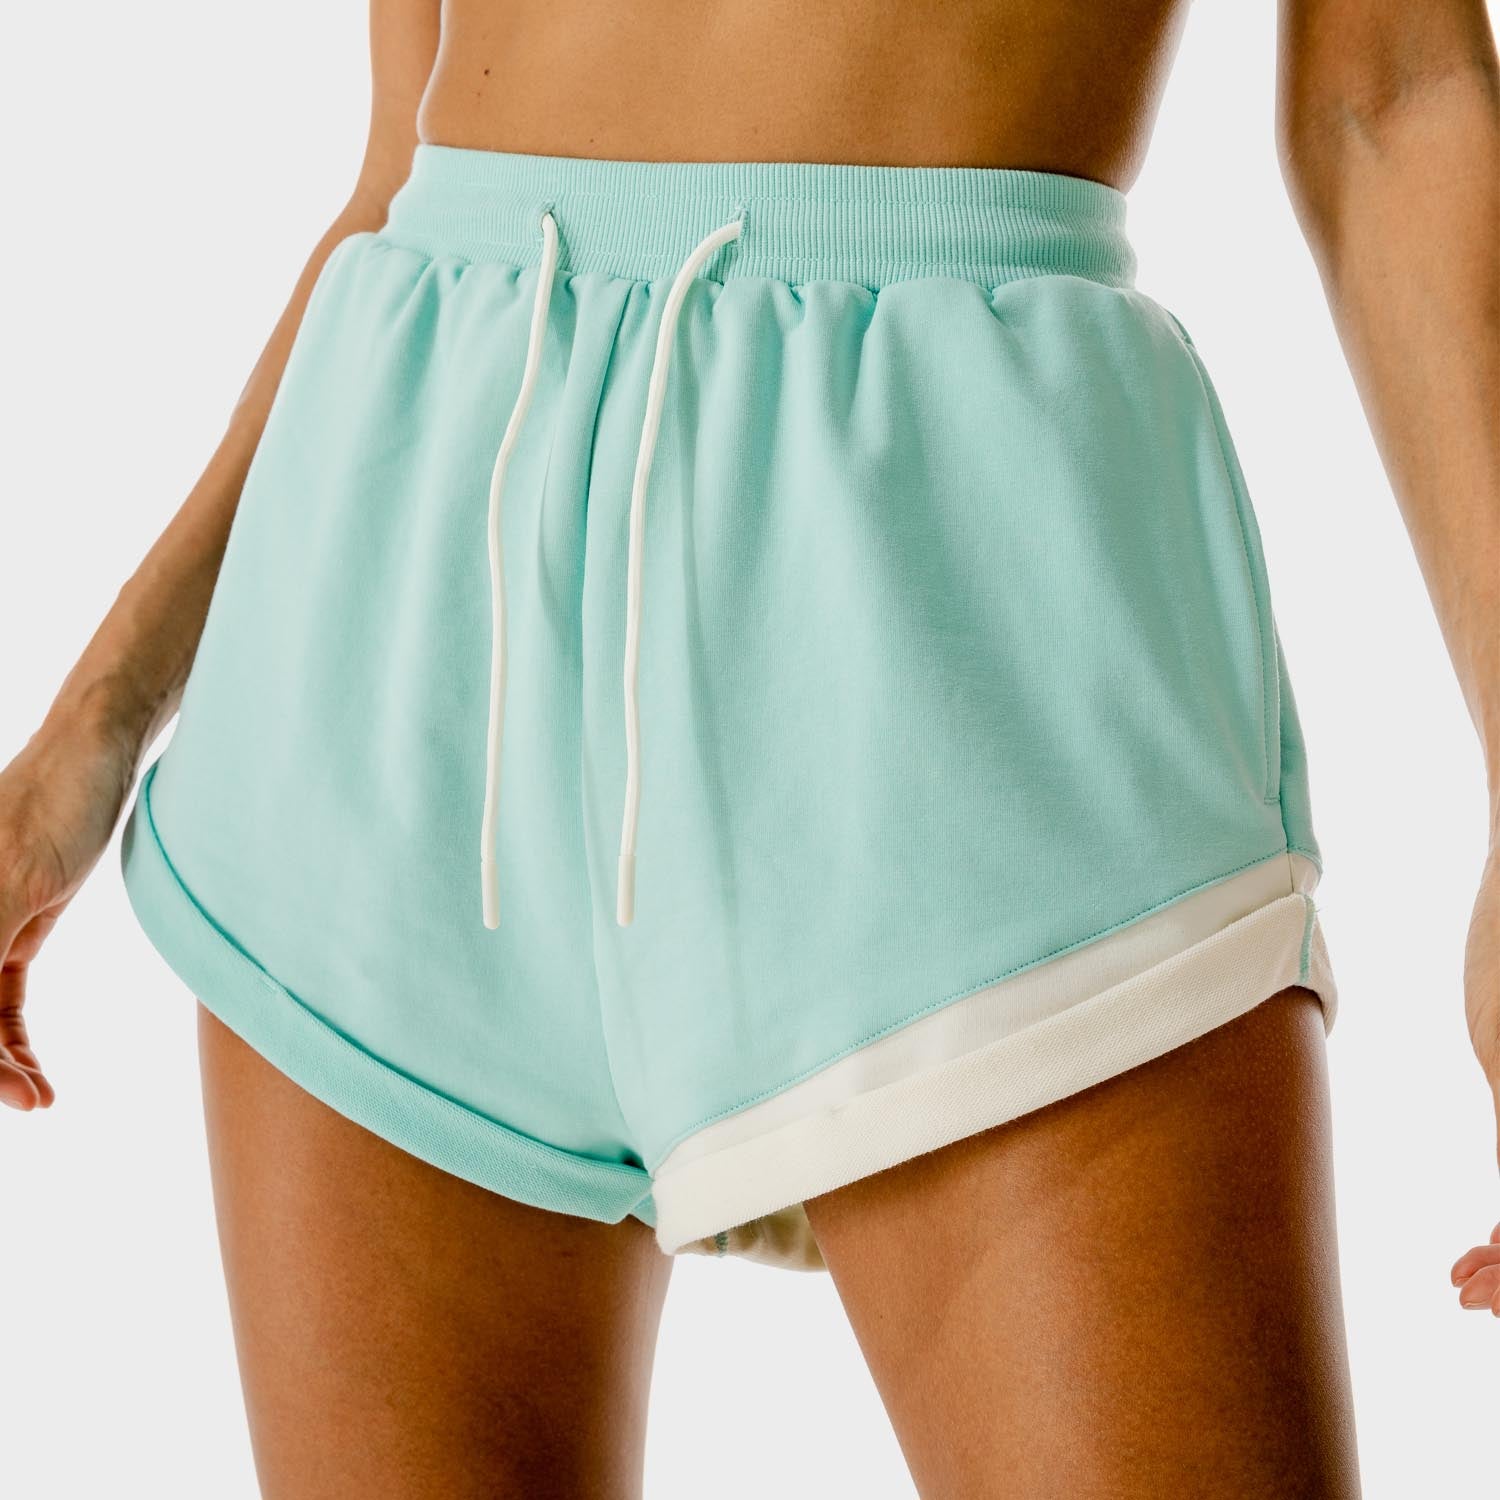 squatwolf-workout-clothes-lab-shorts-blue-gym-shorts-for-women